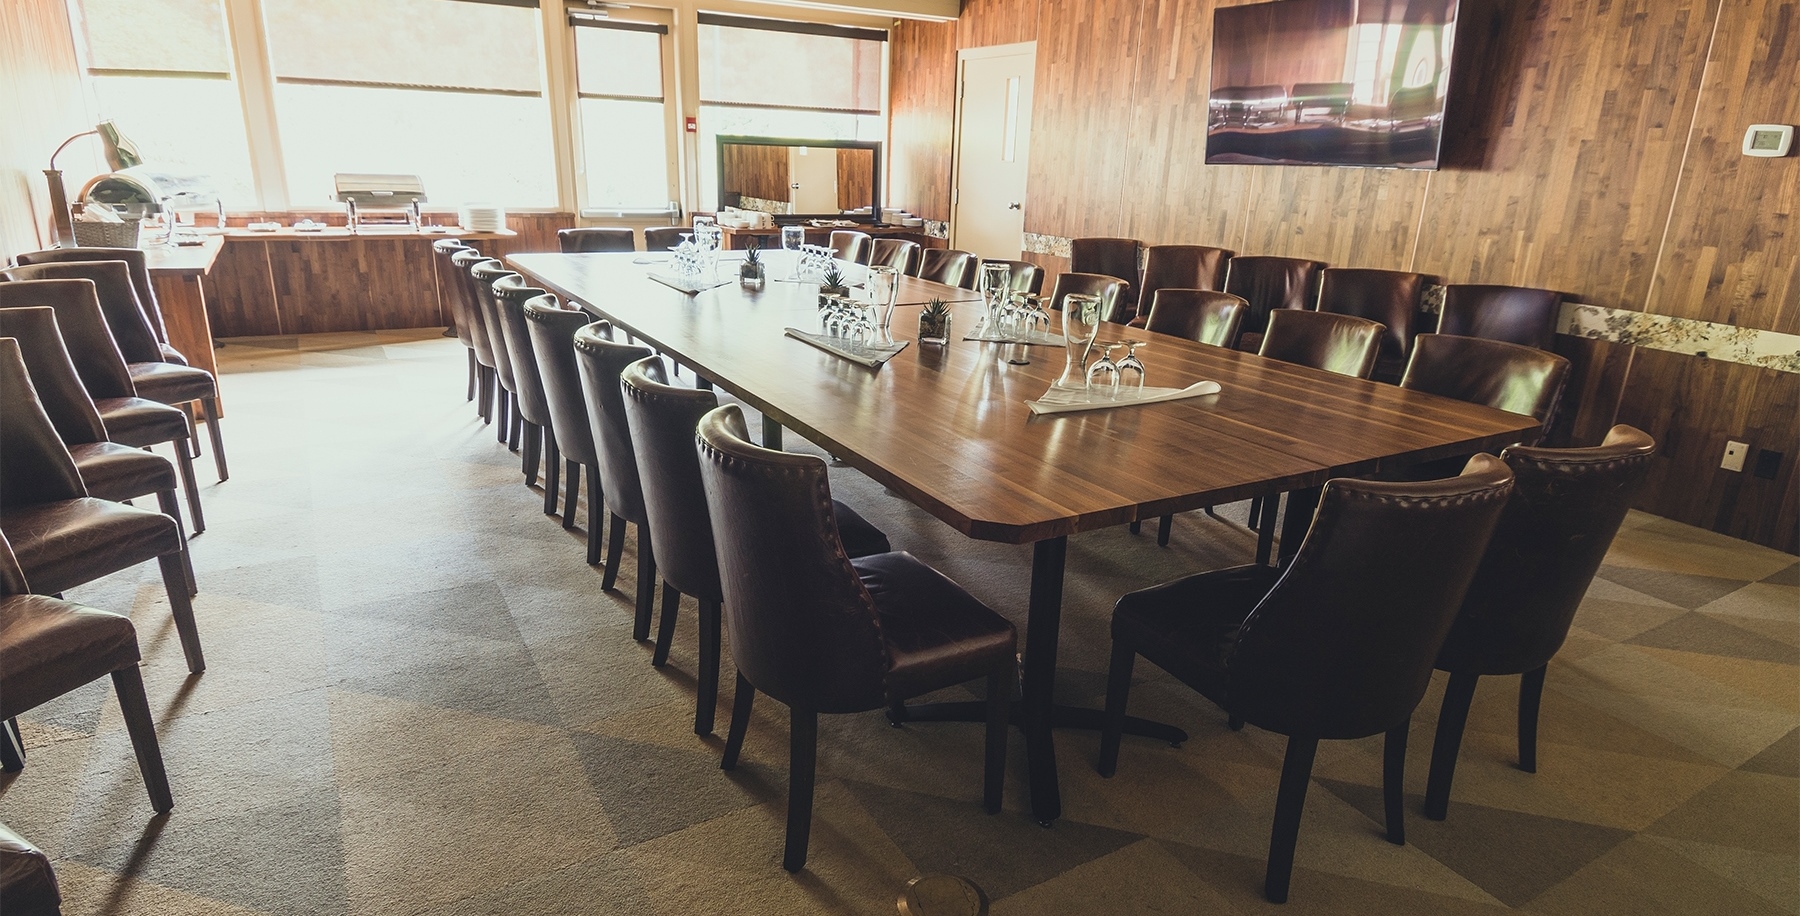 Meeting Room at the Burnaby Mountain Clubhouse